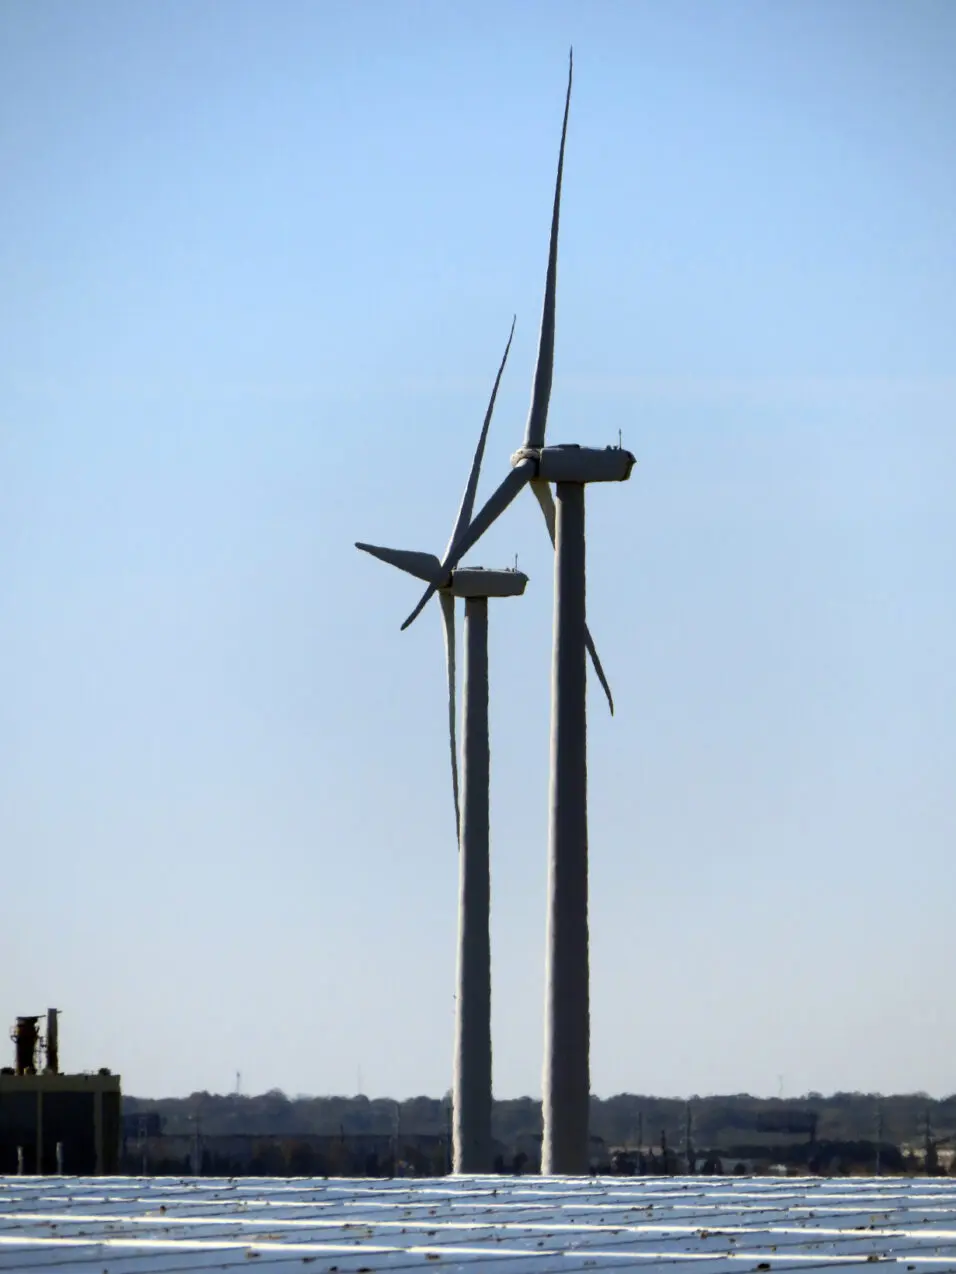 LA Post: New Jersey seeks fourth round of offshore wind farm proposals as foes push back